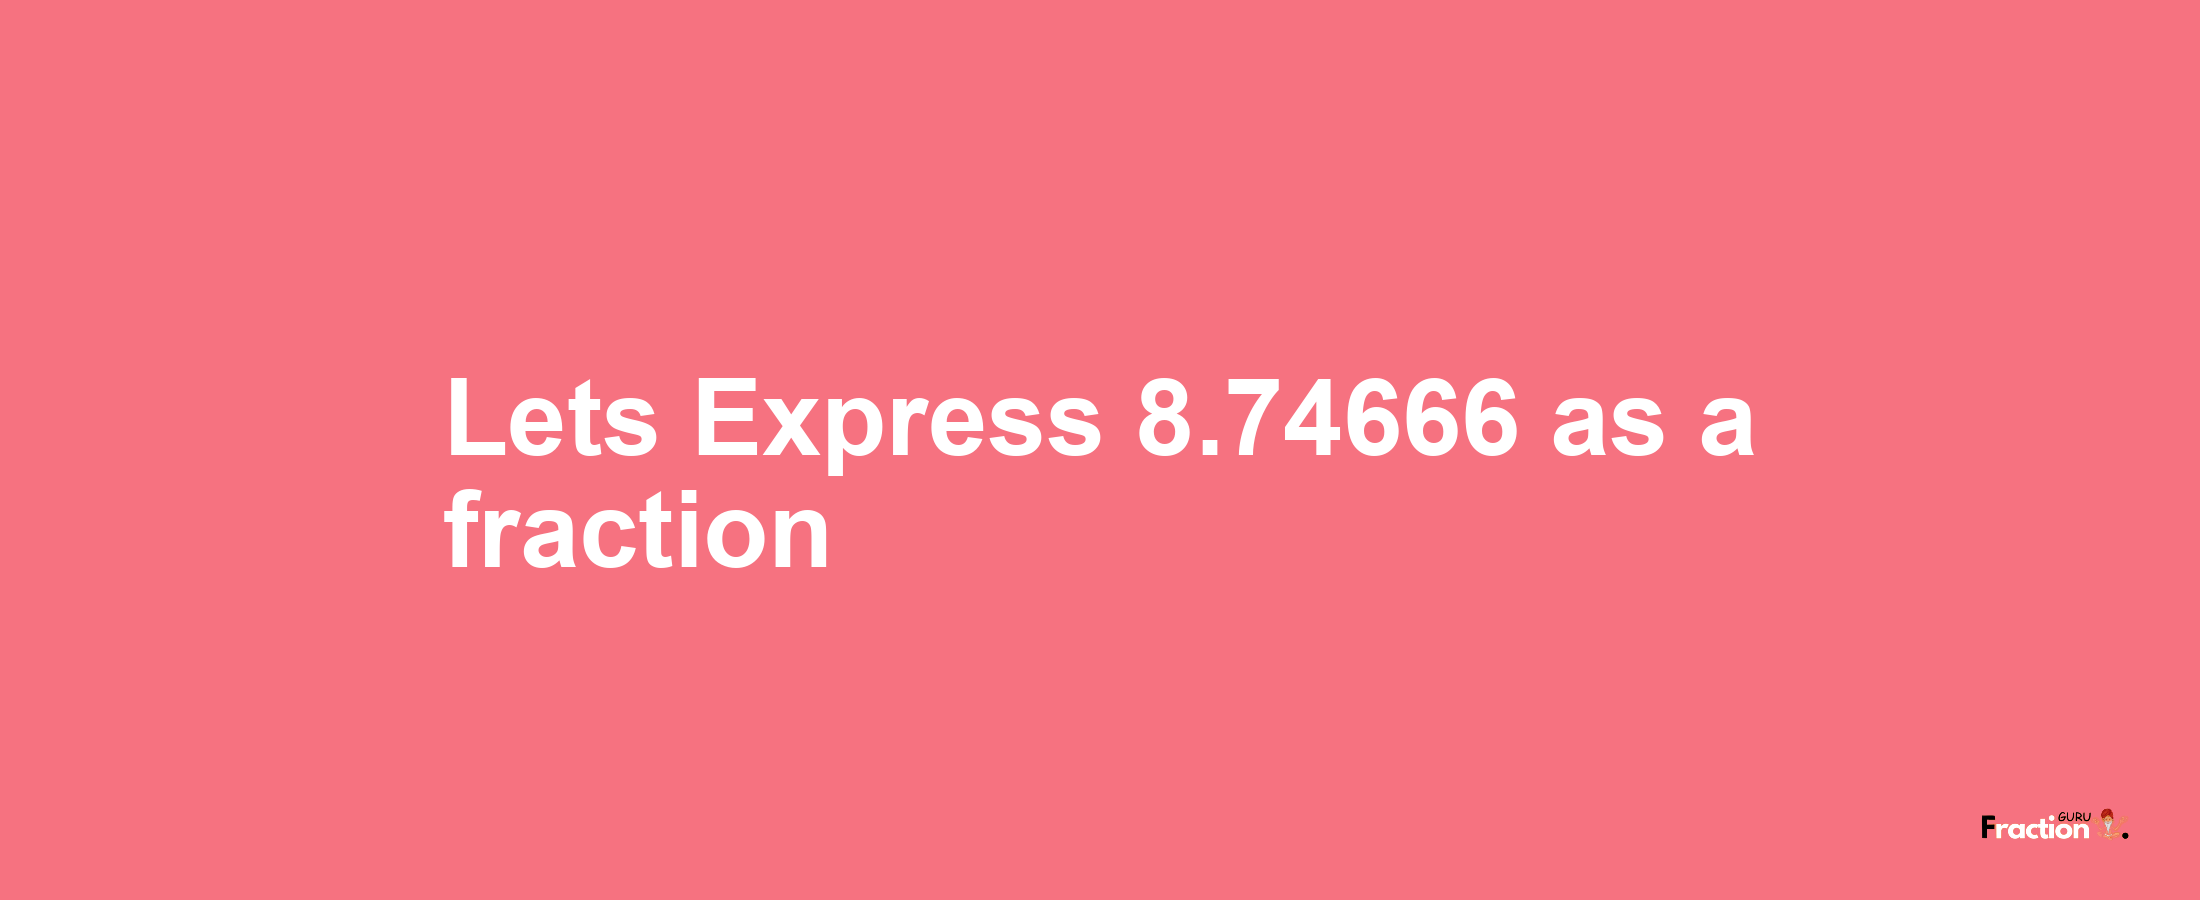 Lets Express 8.74666 as afraction